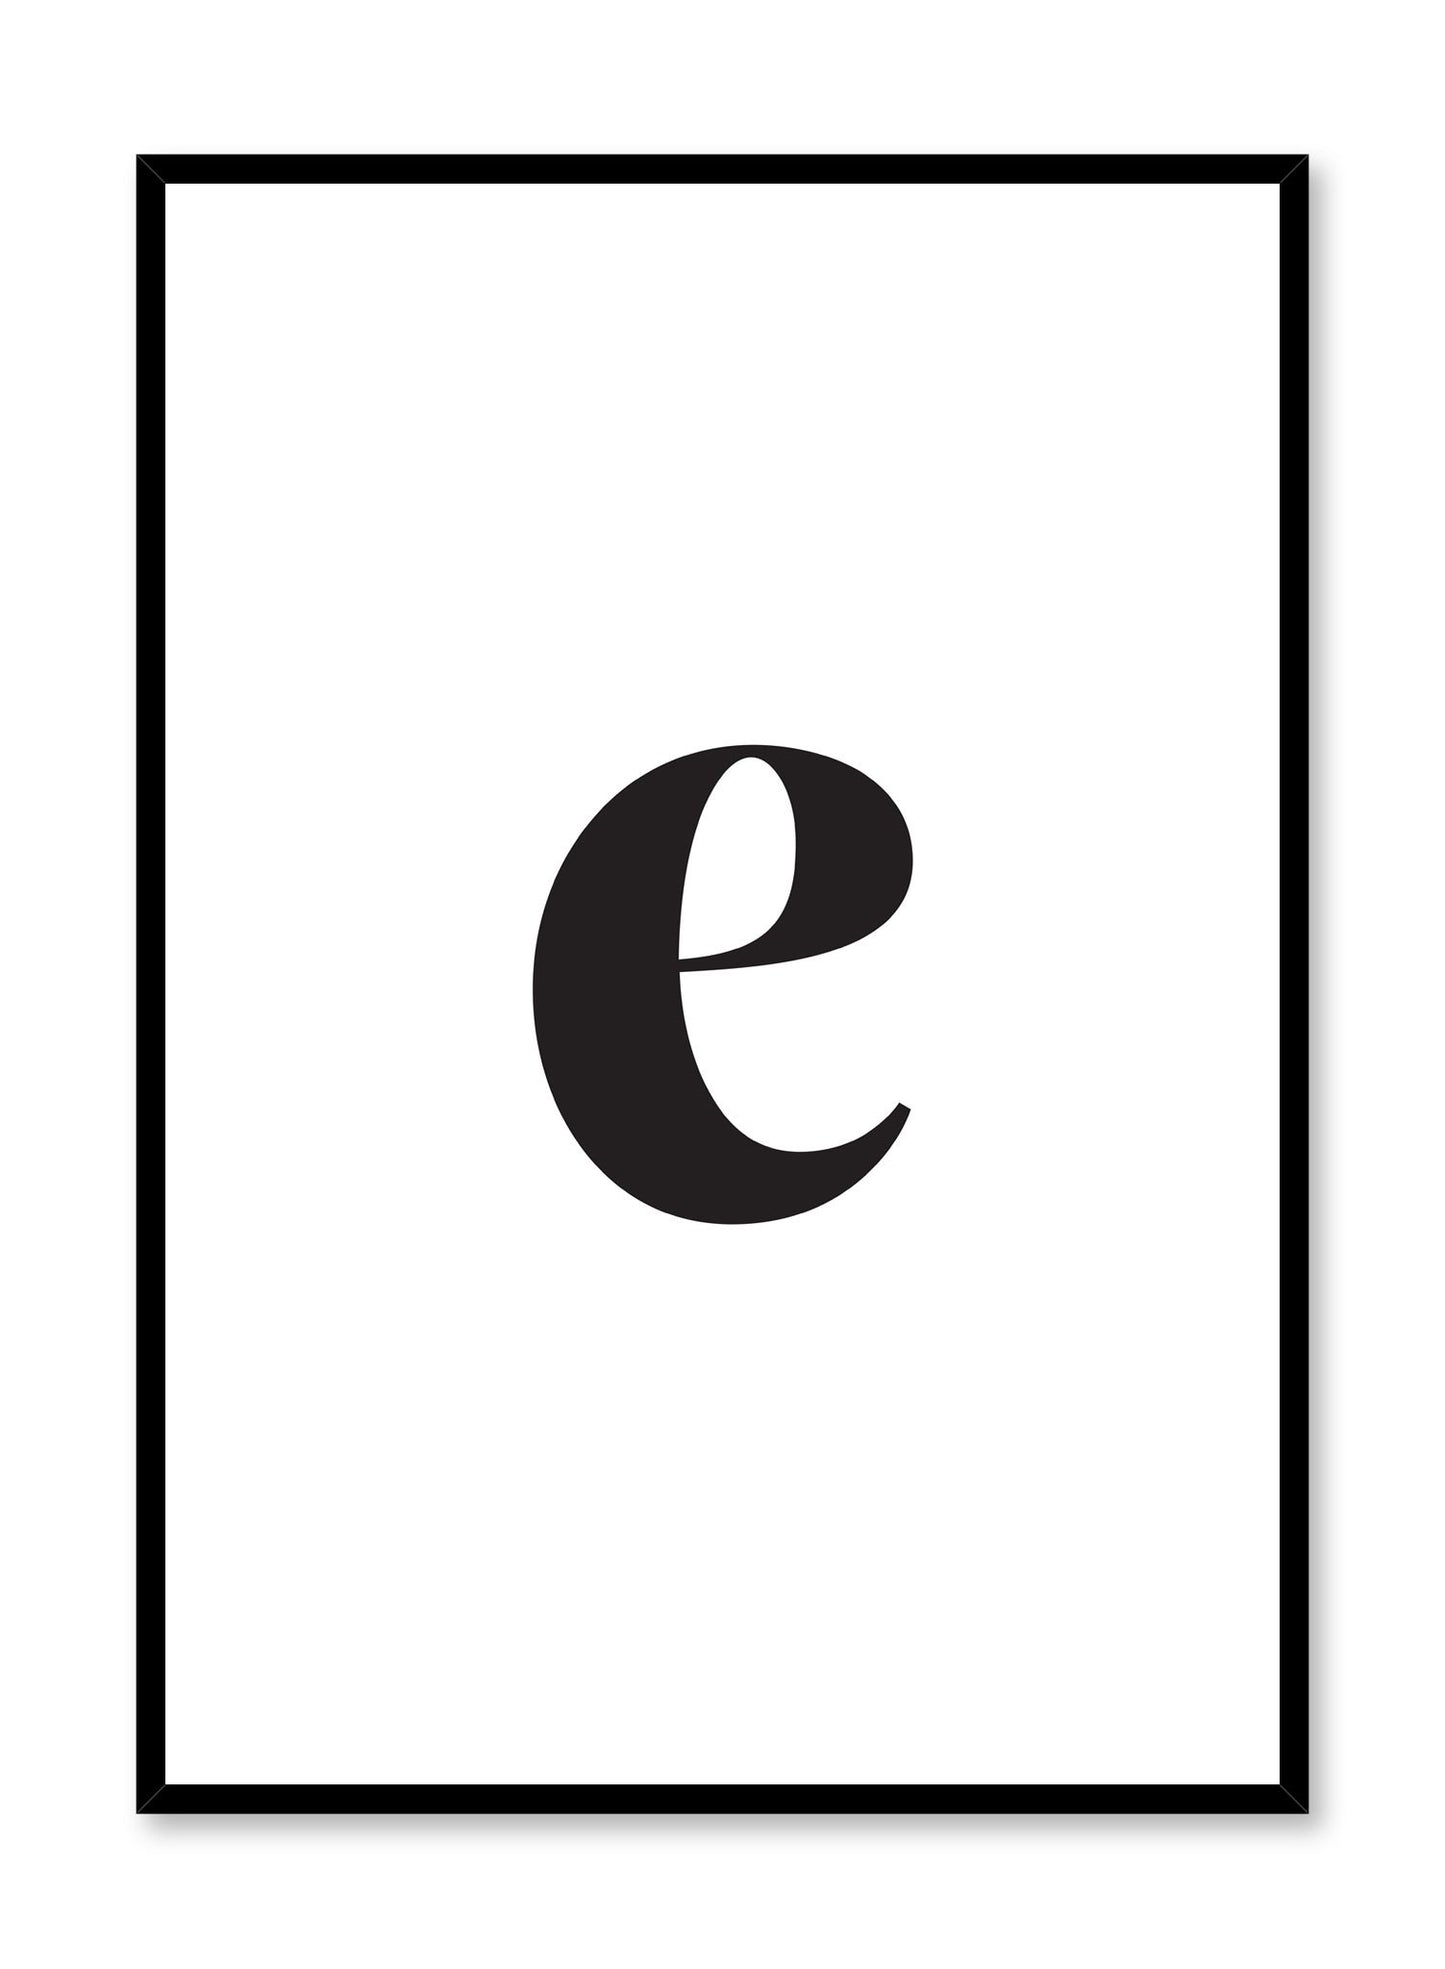 Scandinavian poster with black and white graphic typography design of lowercase letter E by Opposite Wall